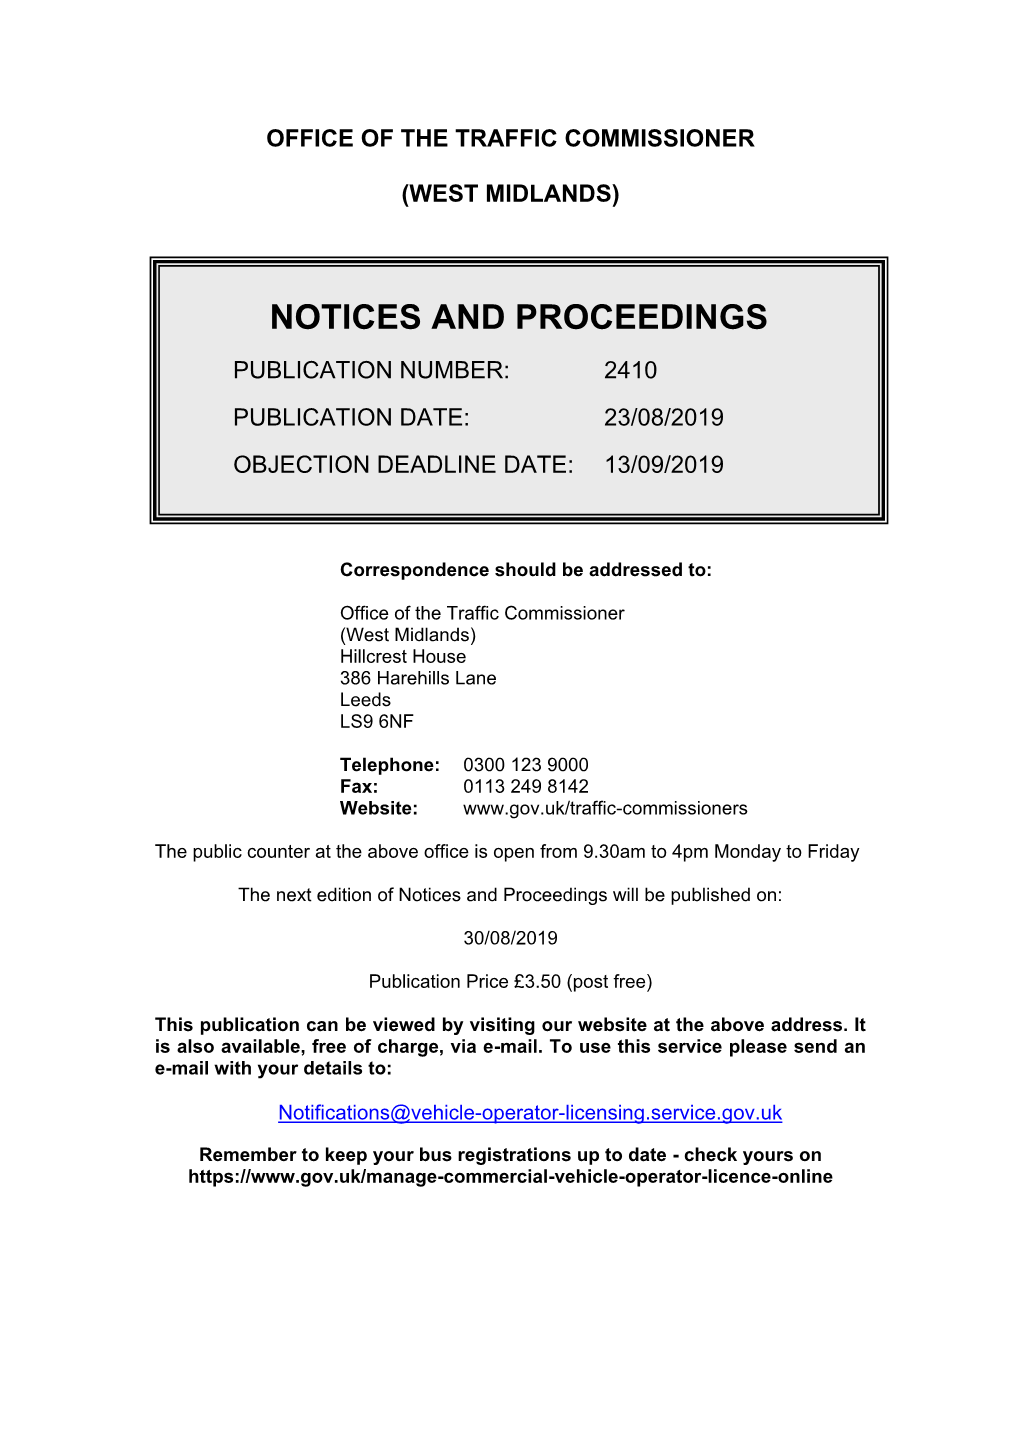 Notices and Proceedings 2410